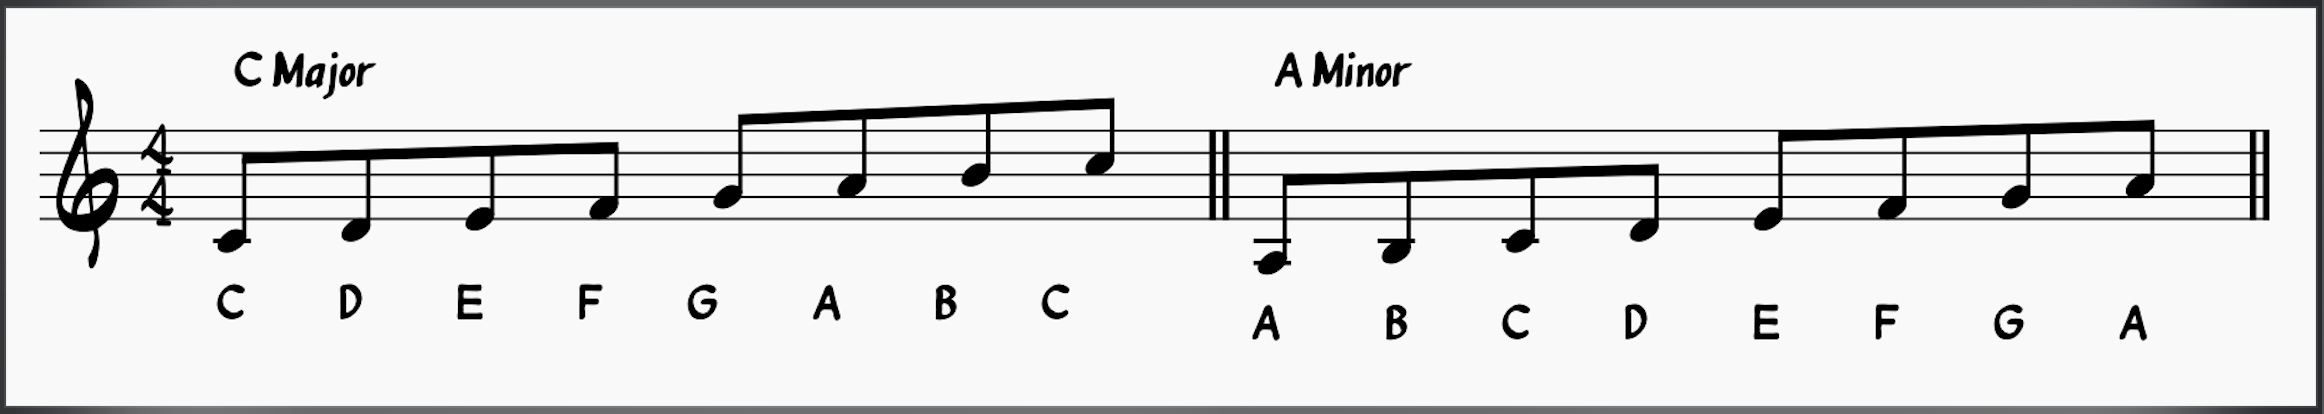 C major compared to A minor